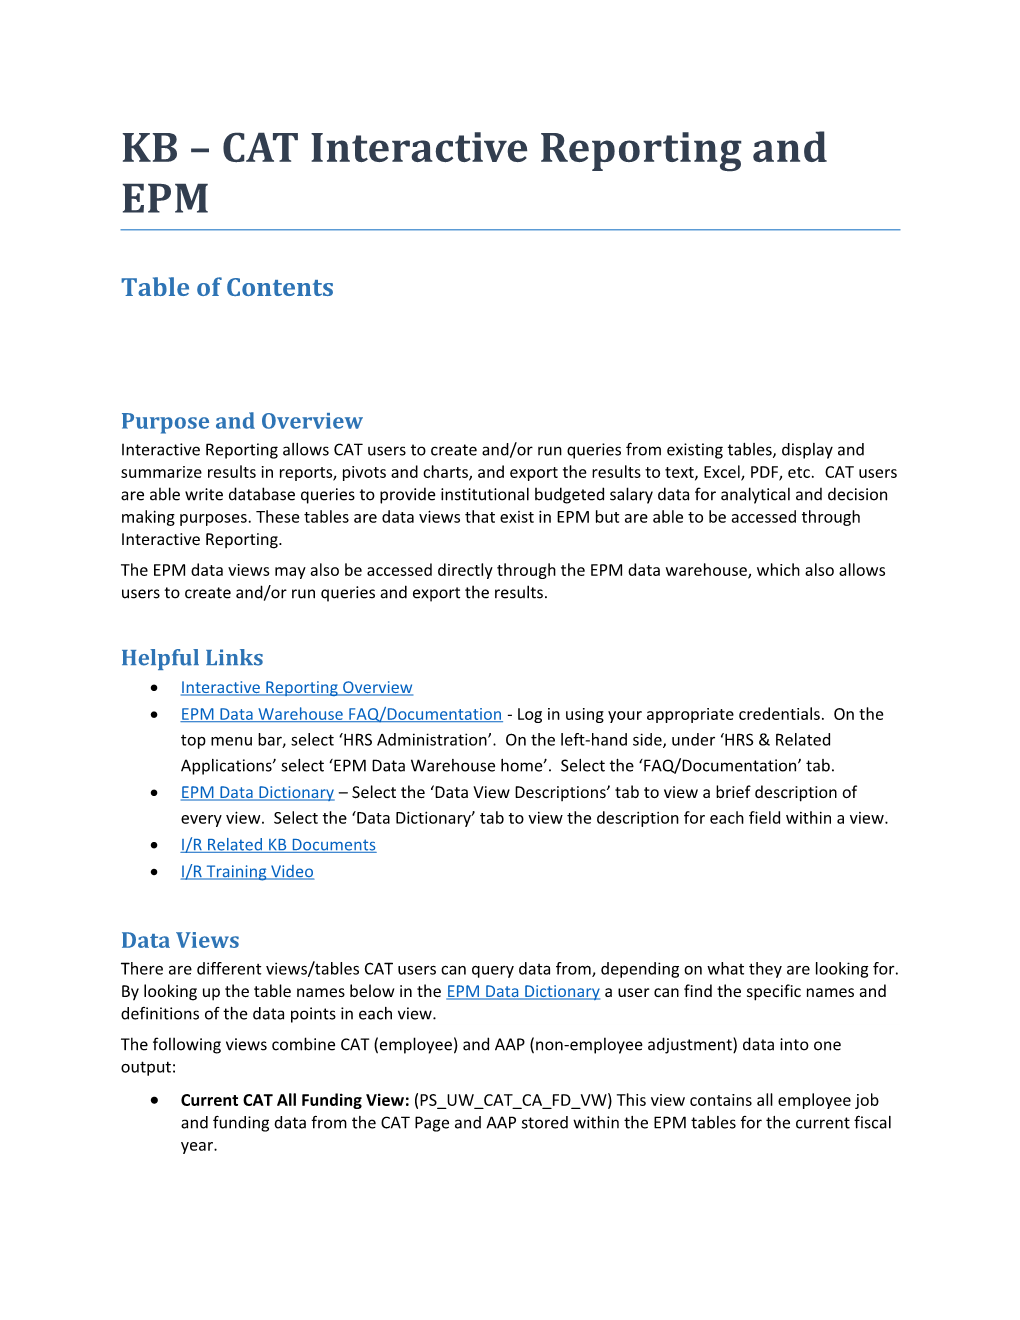 KB CAT Interactive Reporting and EPM